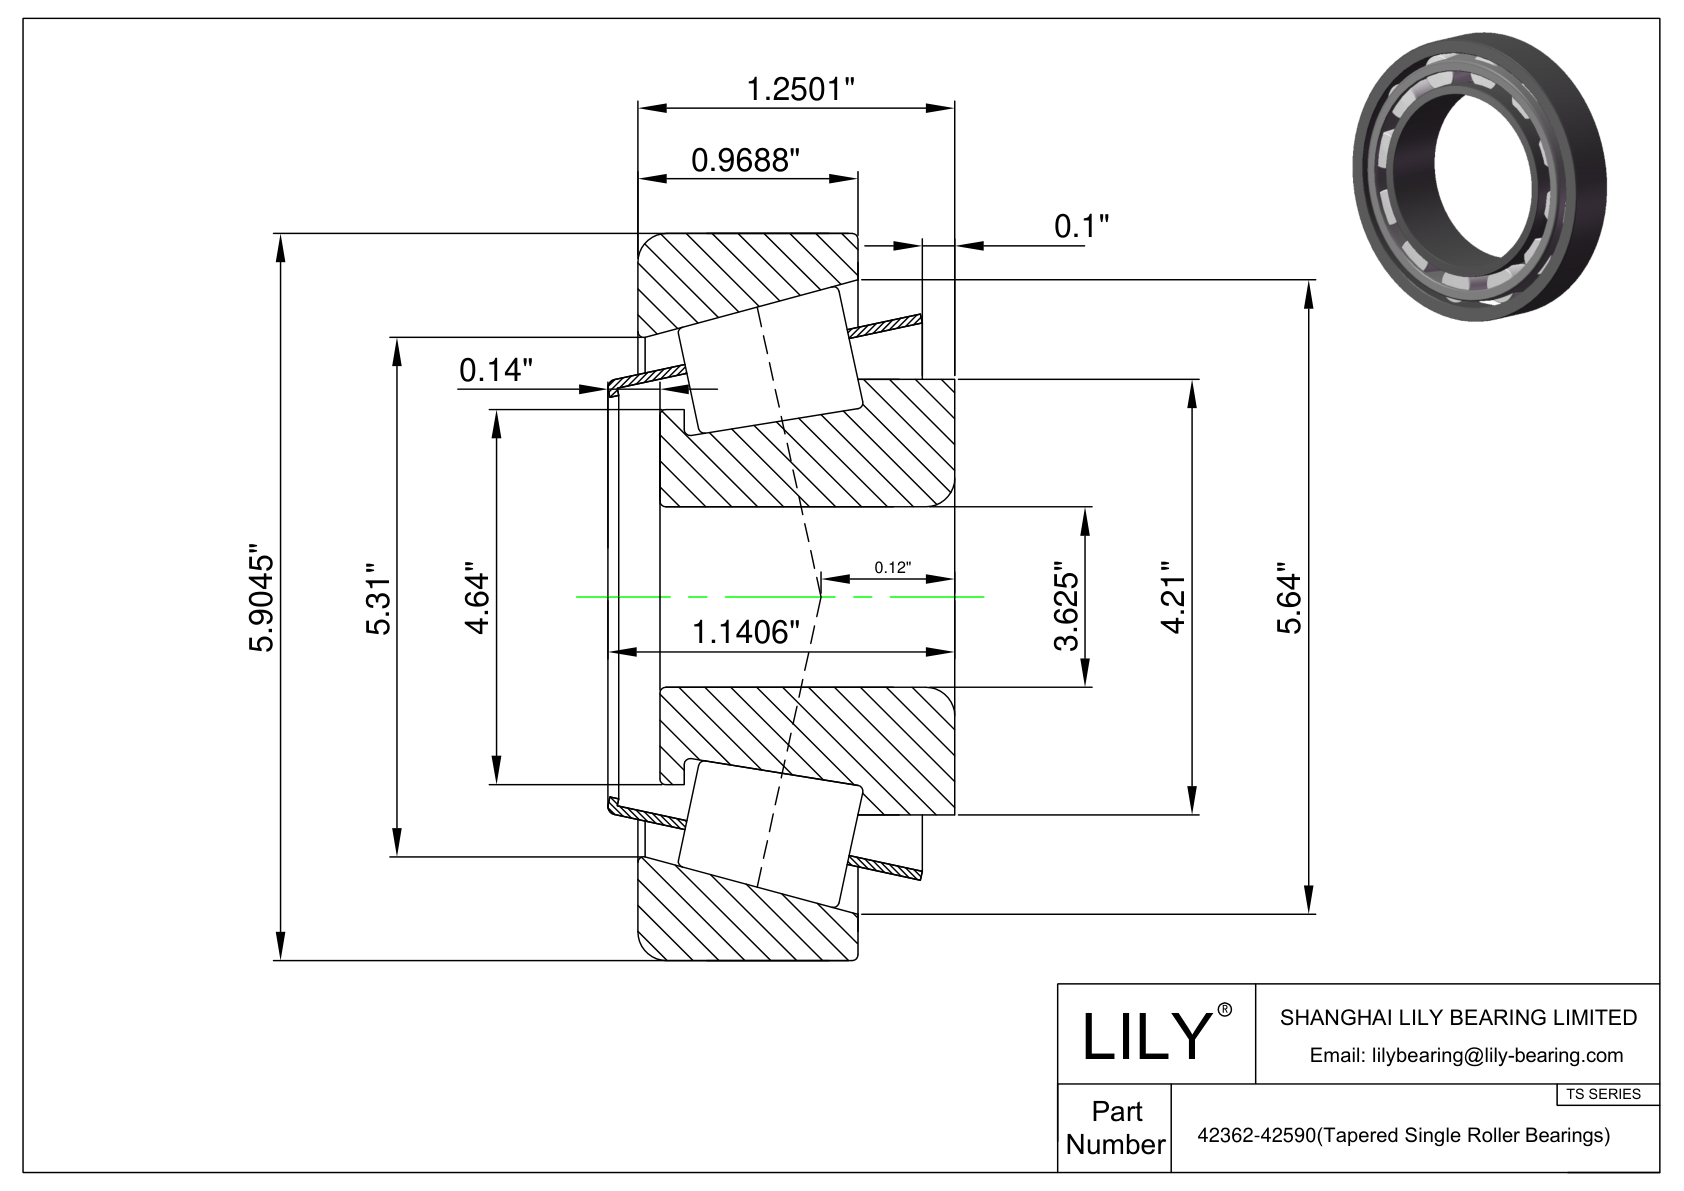 42362-42590 TS (Tapered Single Roller Bearings) (Imperial) cad drawing